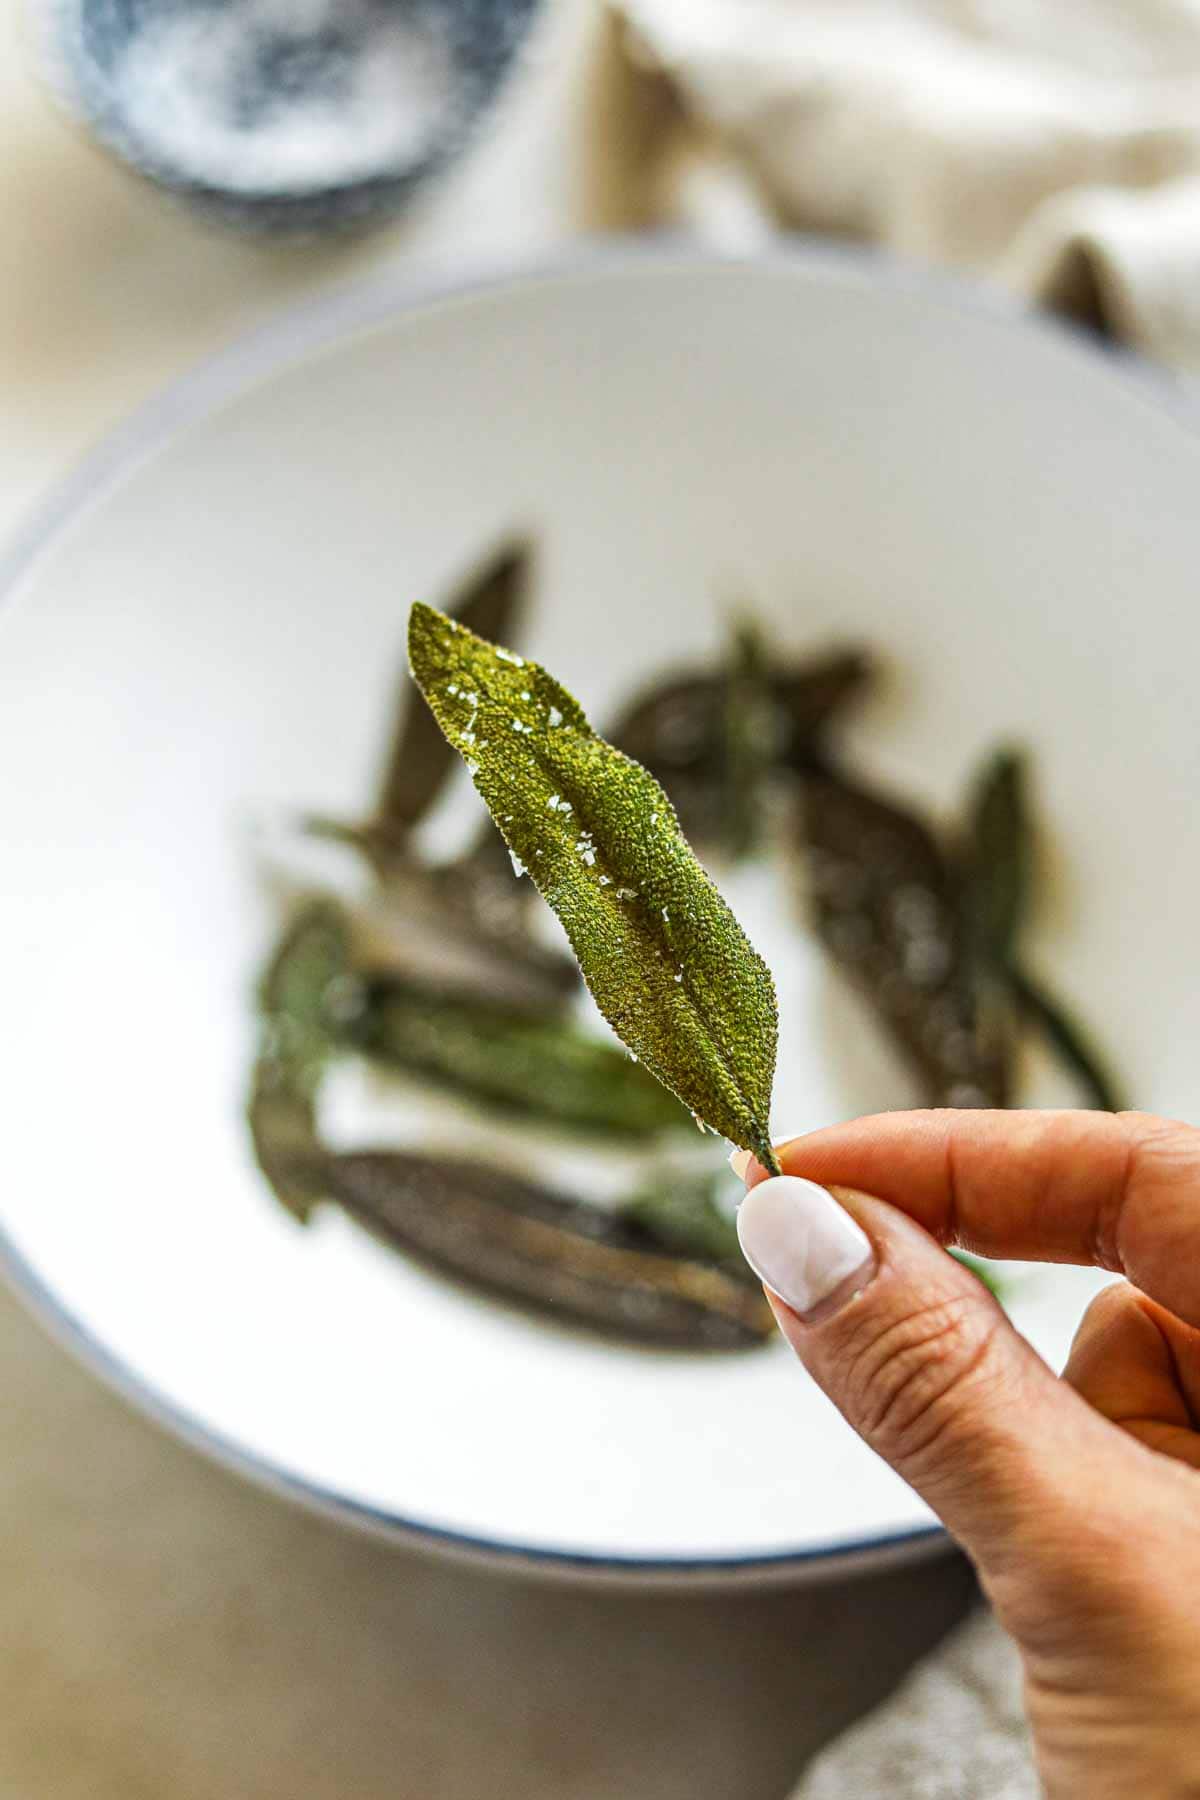 Fried sage leaves in a bowl and a hand holding a crispy sage leaf.